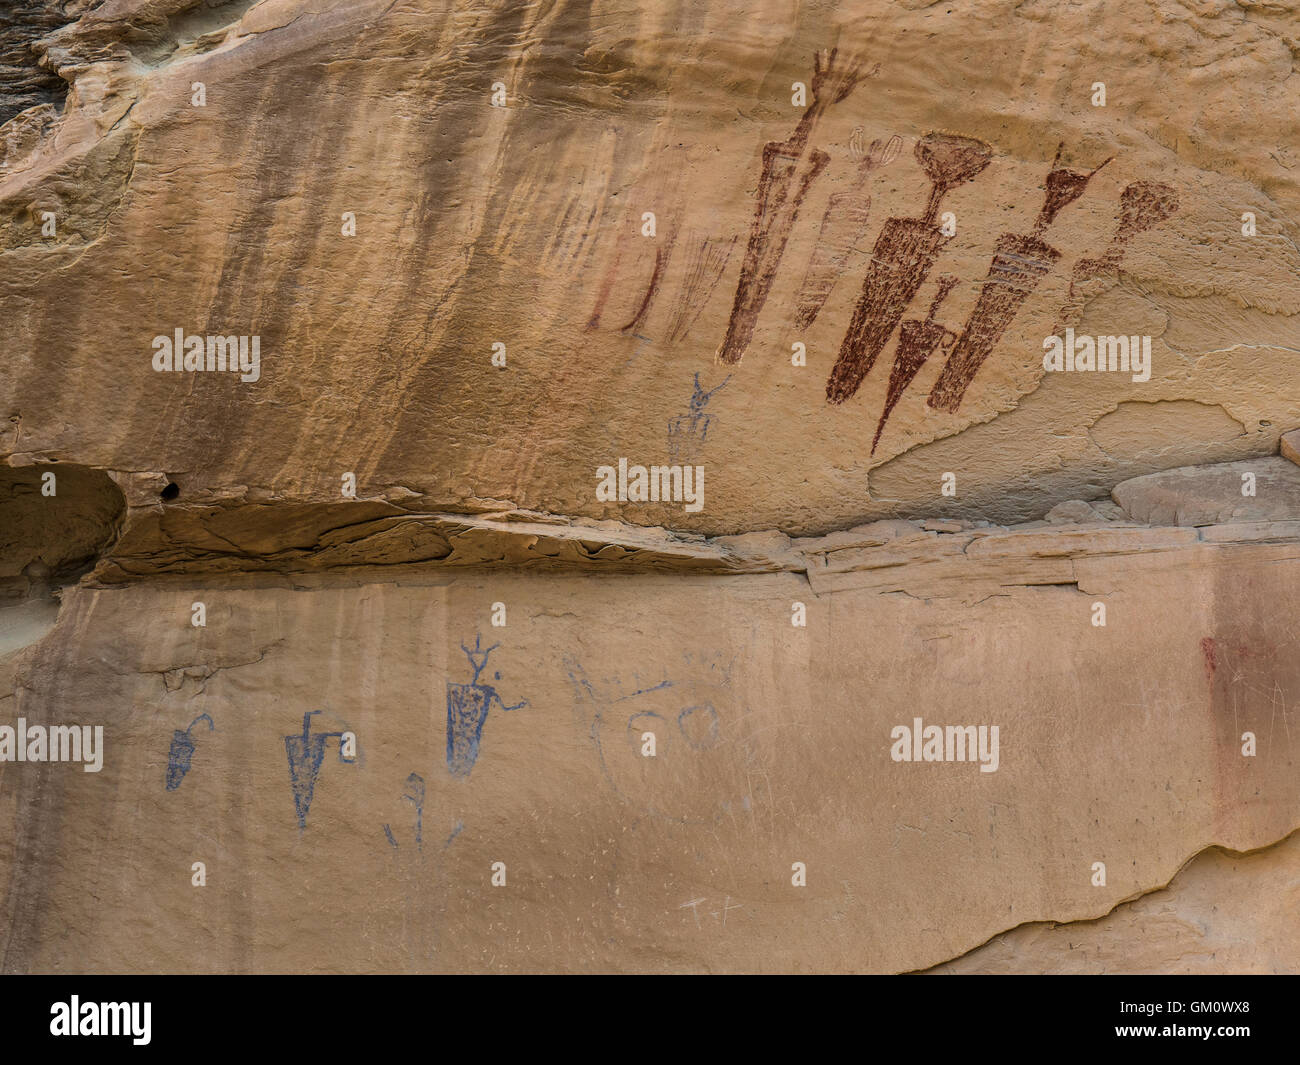 Carrot Men pictograph site, County Road 23 South of Rangely, Colorado. Stock Photo